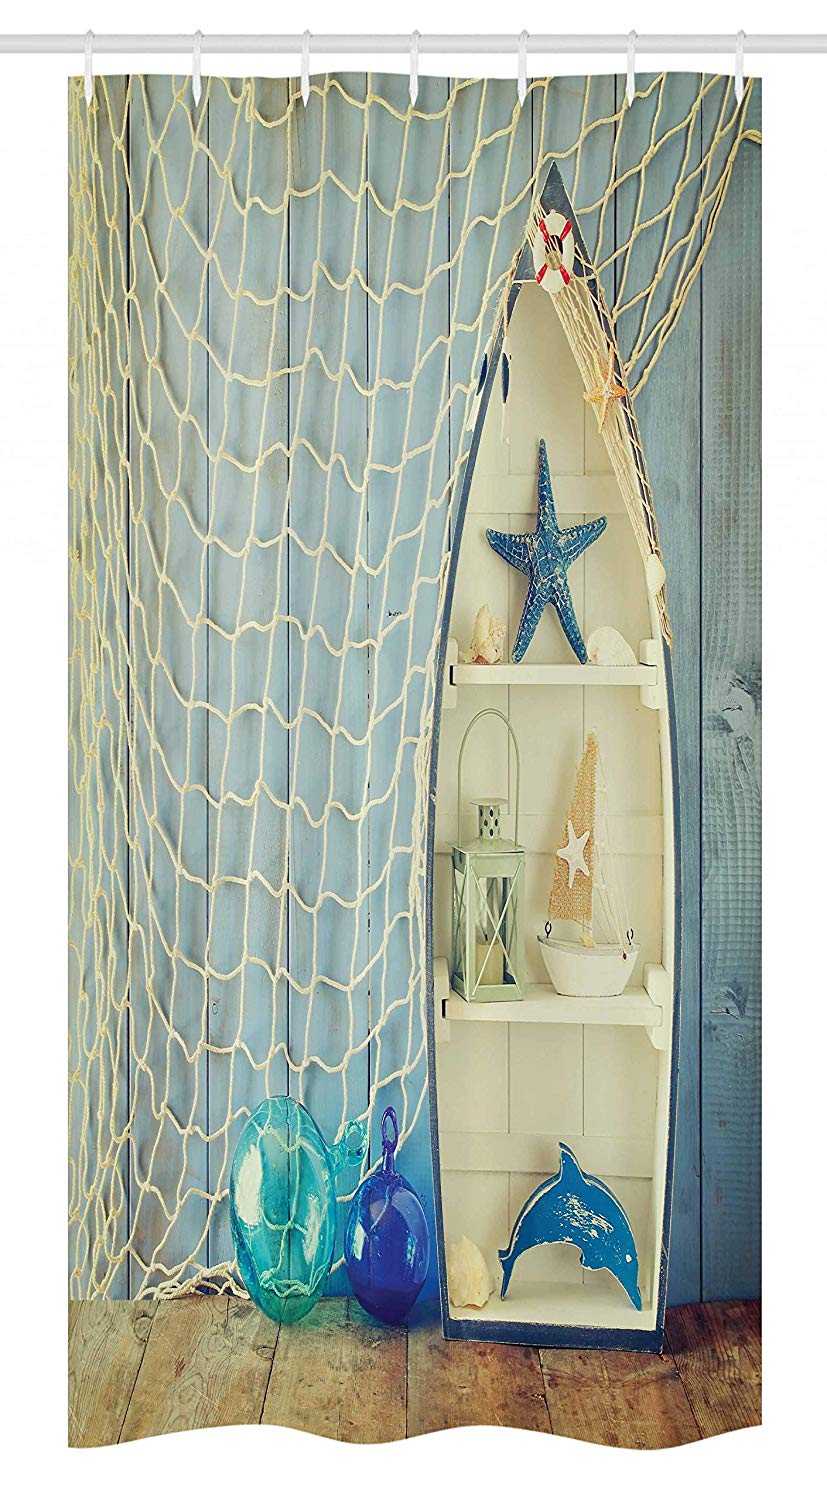 Ambesonne Nautical Stall Shower Curtain, Nautical Boat Standing Against The Wall Other Aquatic Objects Sea Featured Picture, Fabric Bathroom Decor Set with Hooks, 36" X 72", Blue Beige